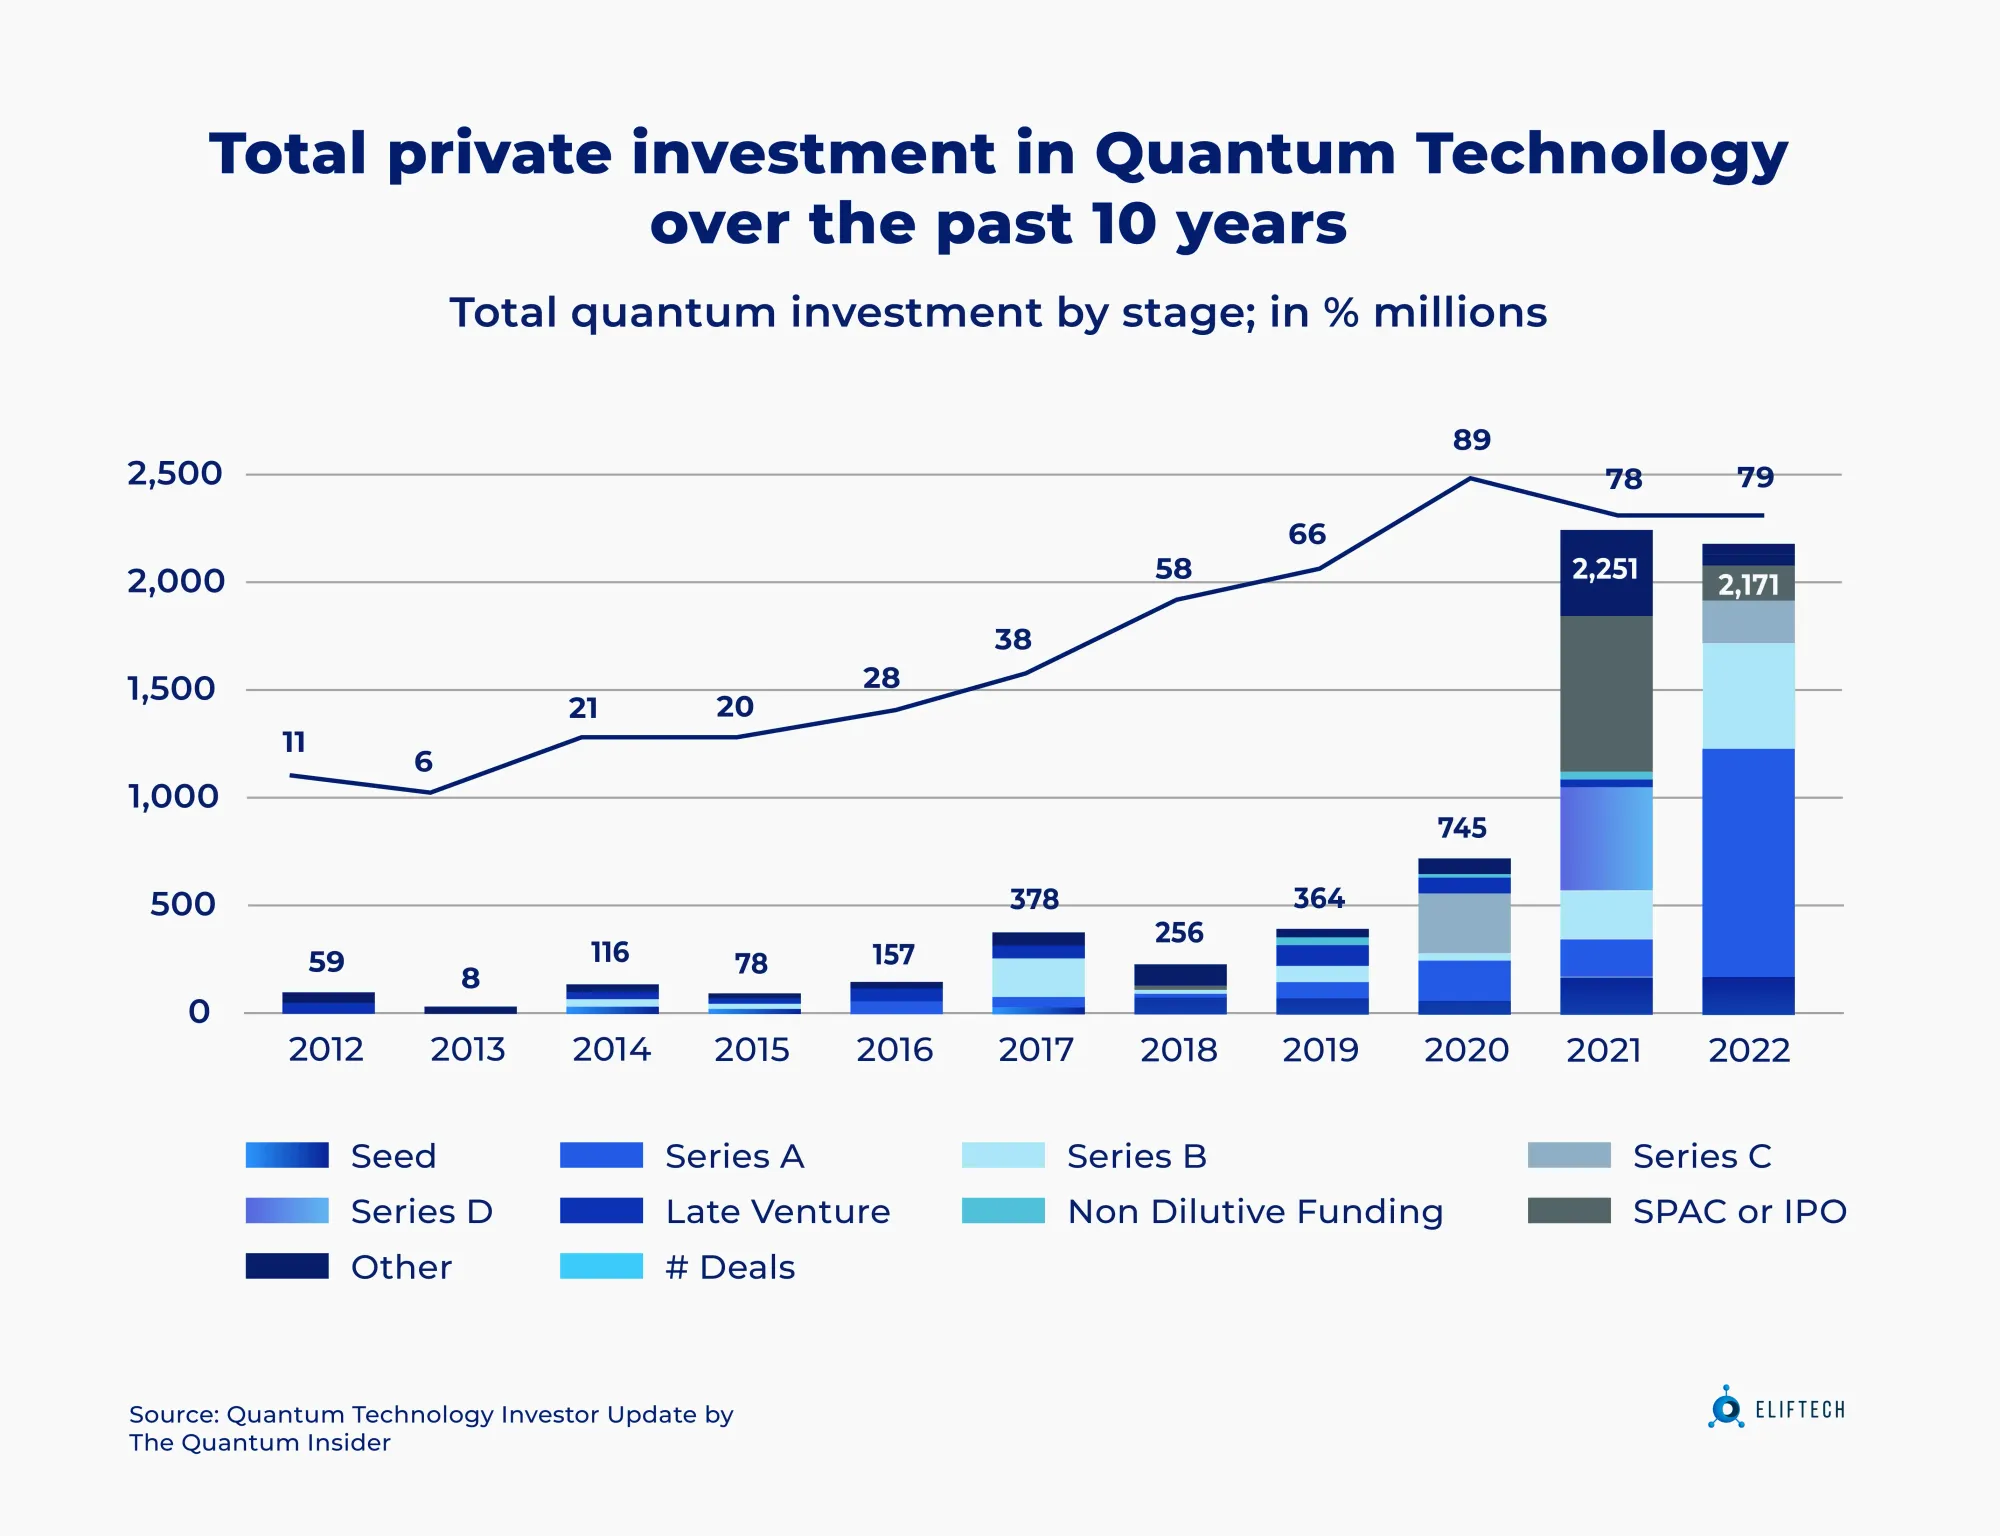 Total private investment in Quantum Technology over the past 10 years